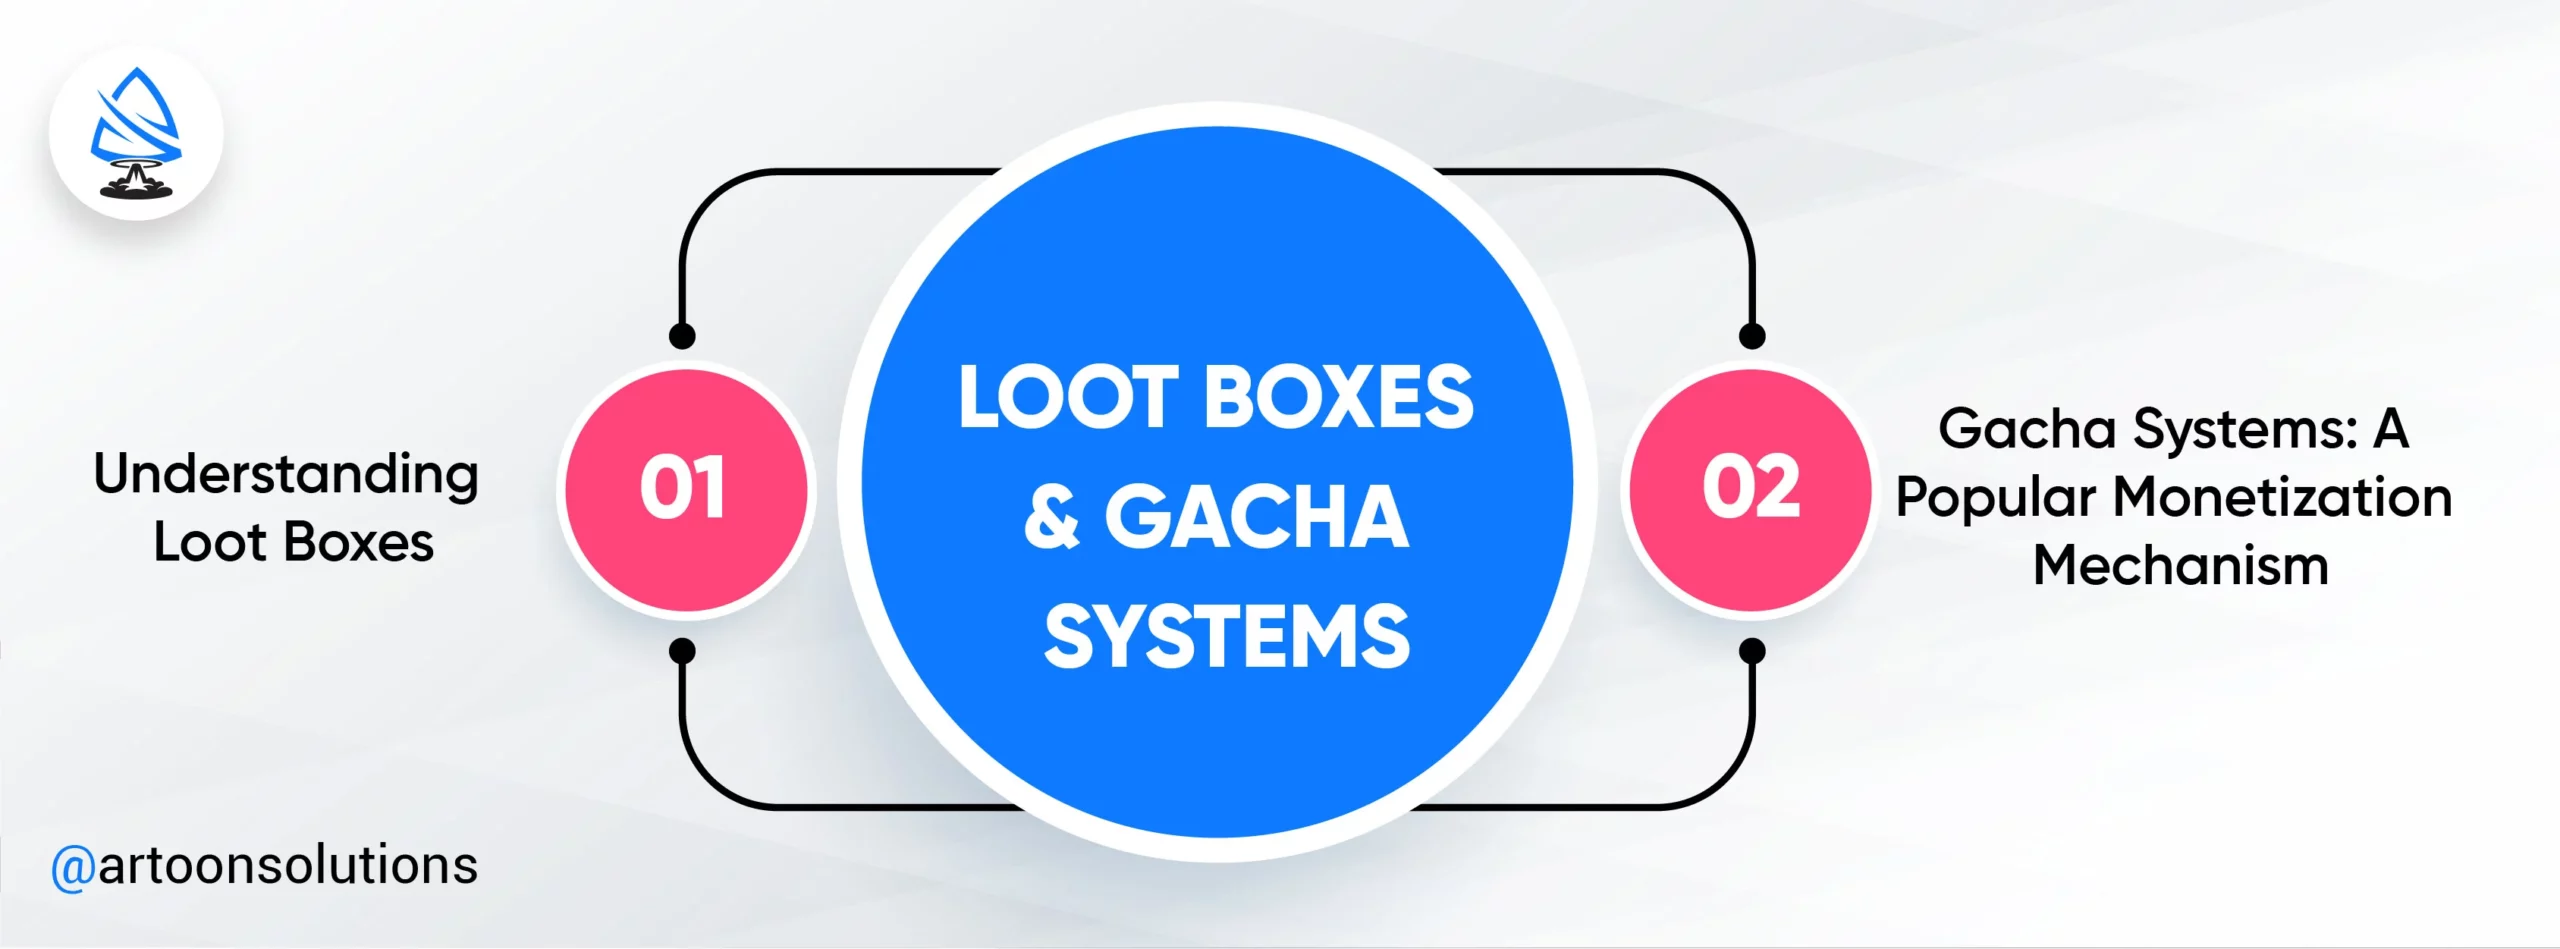 Loot Boxes and Gacha Systems